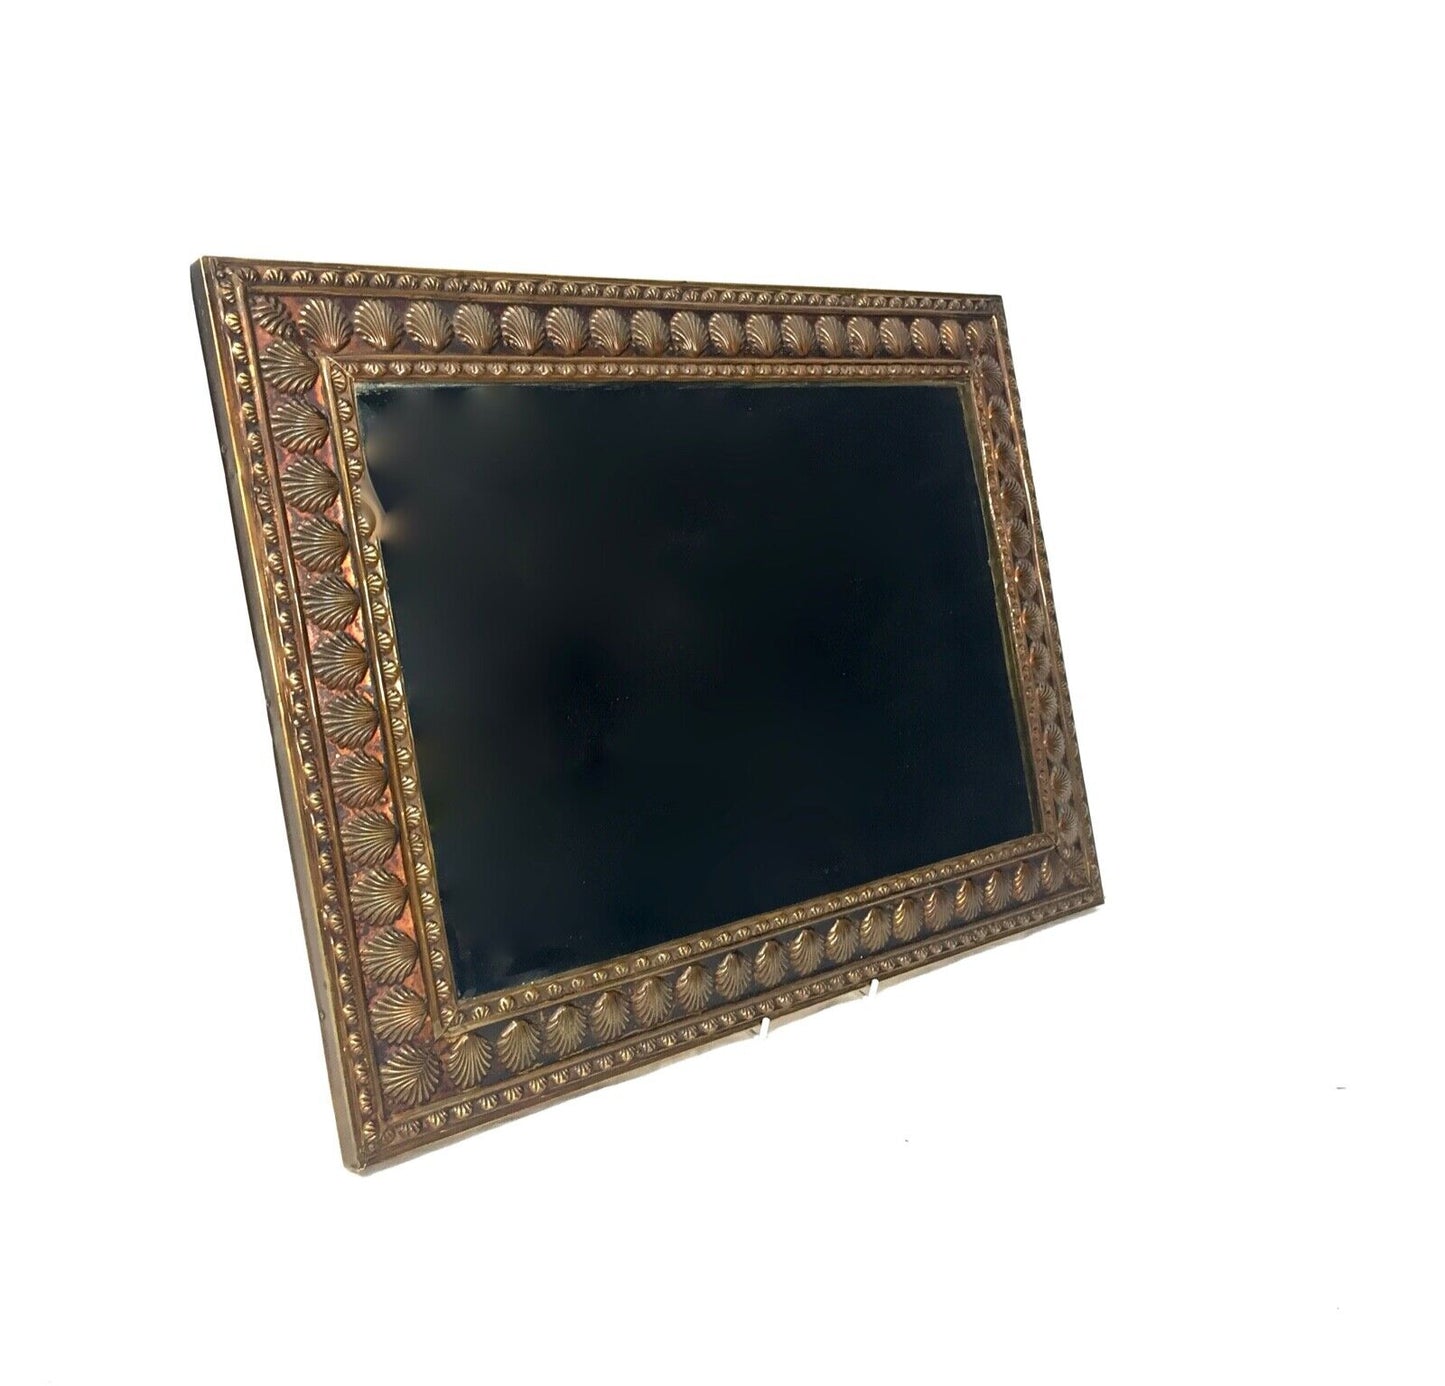 Antique Brass Framed Wall Hanging Mirror / Art Nouveau Style / 20th Century